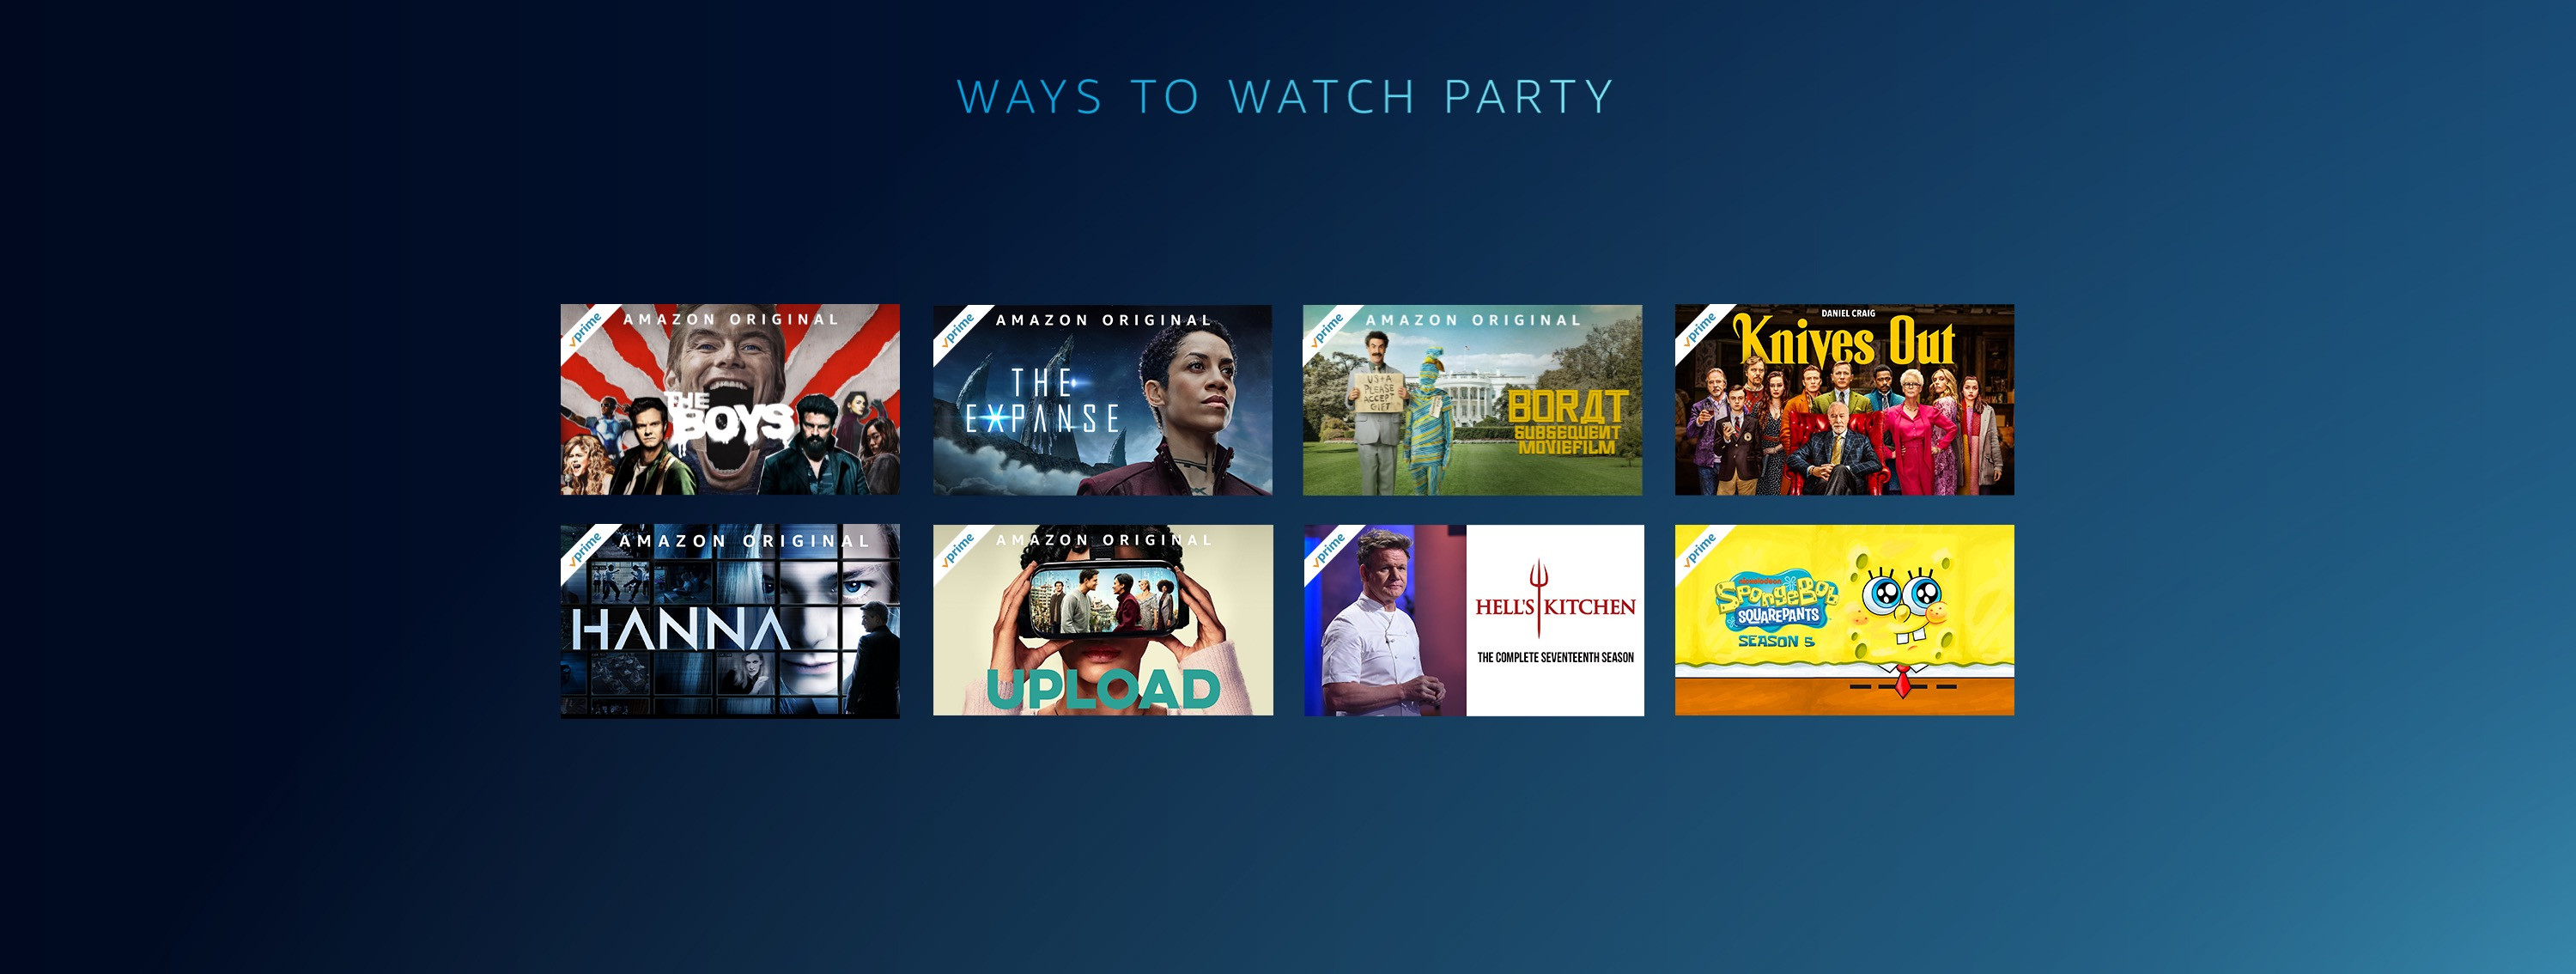 Photo of Prime Video watch party now available on smart TVs